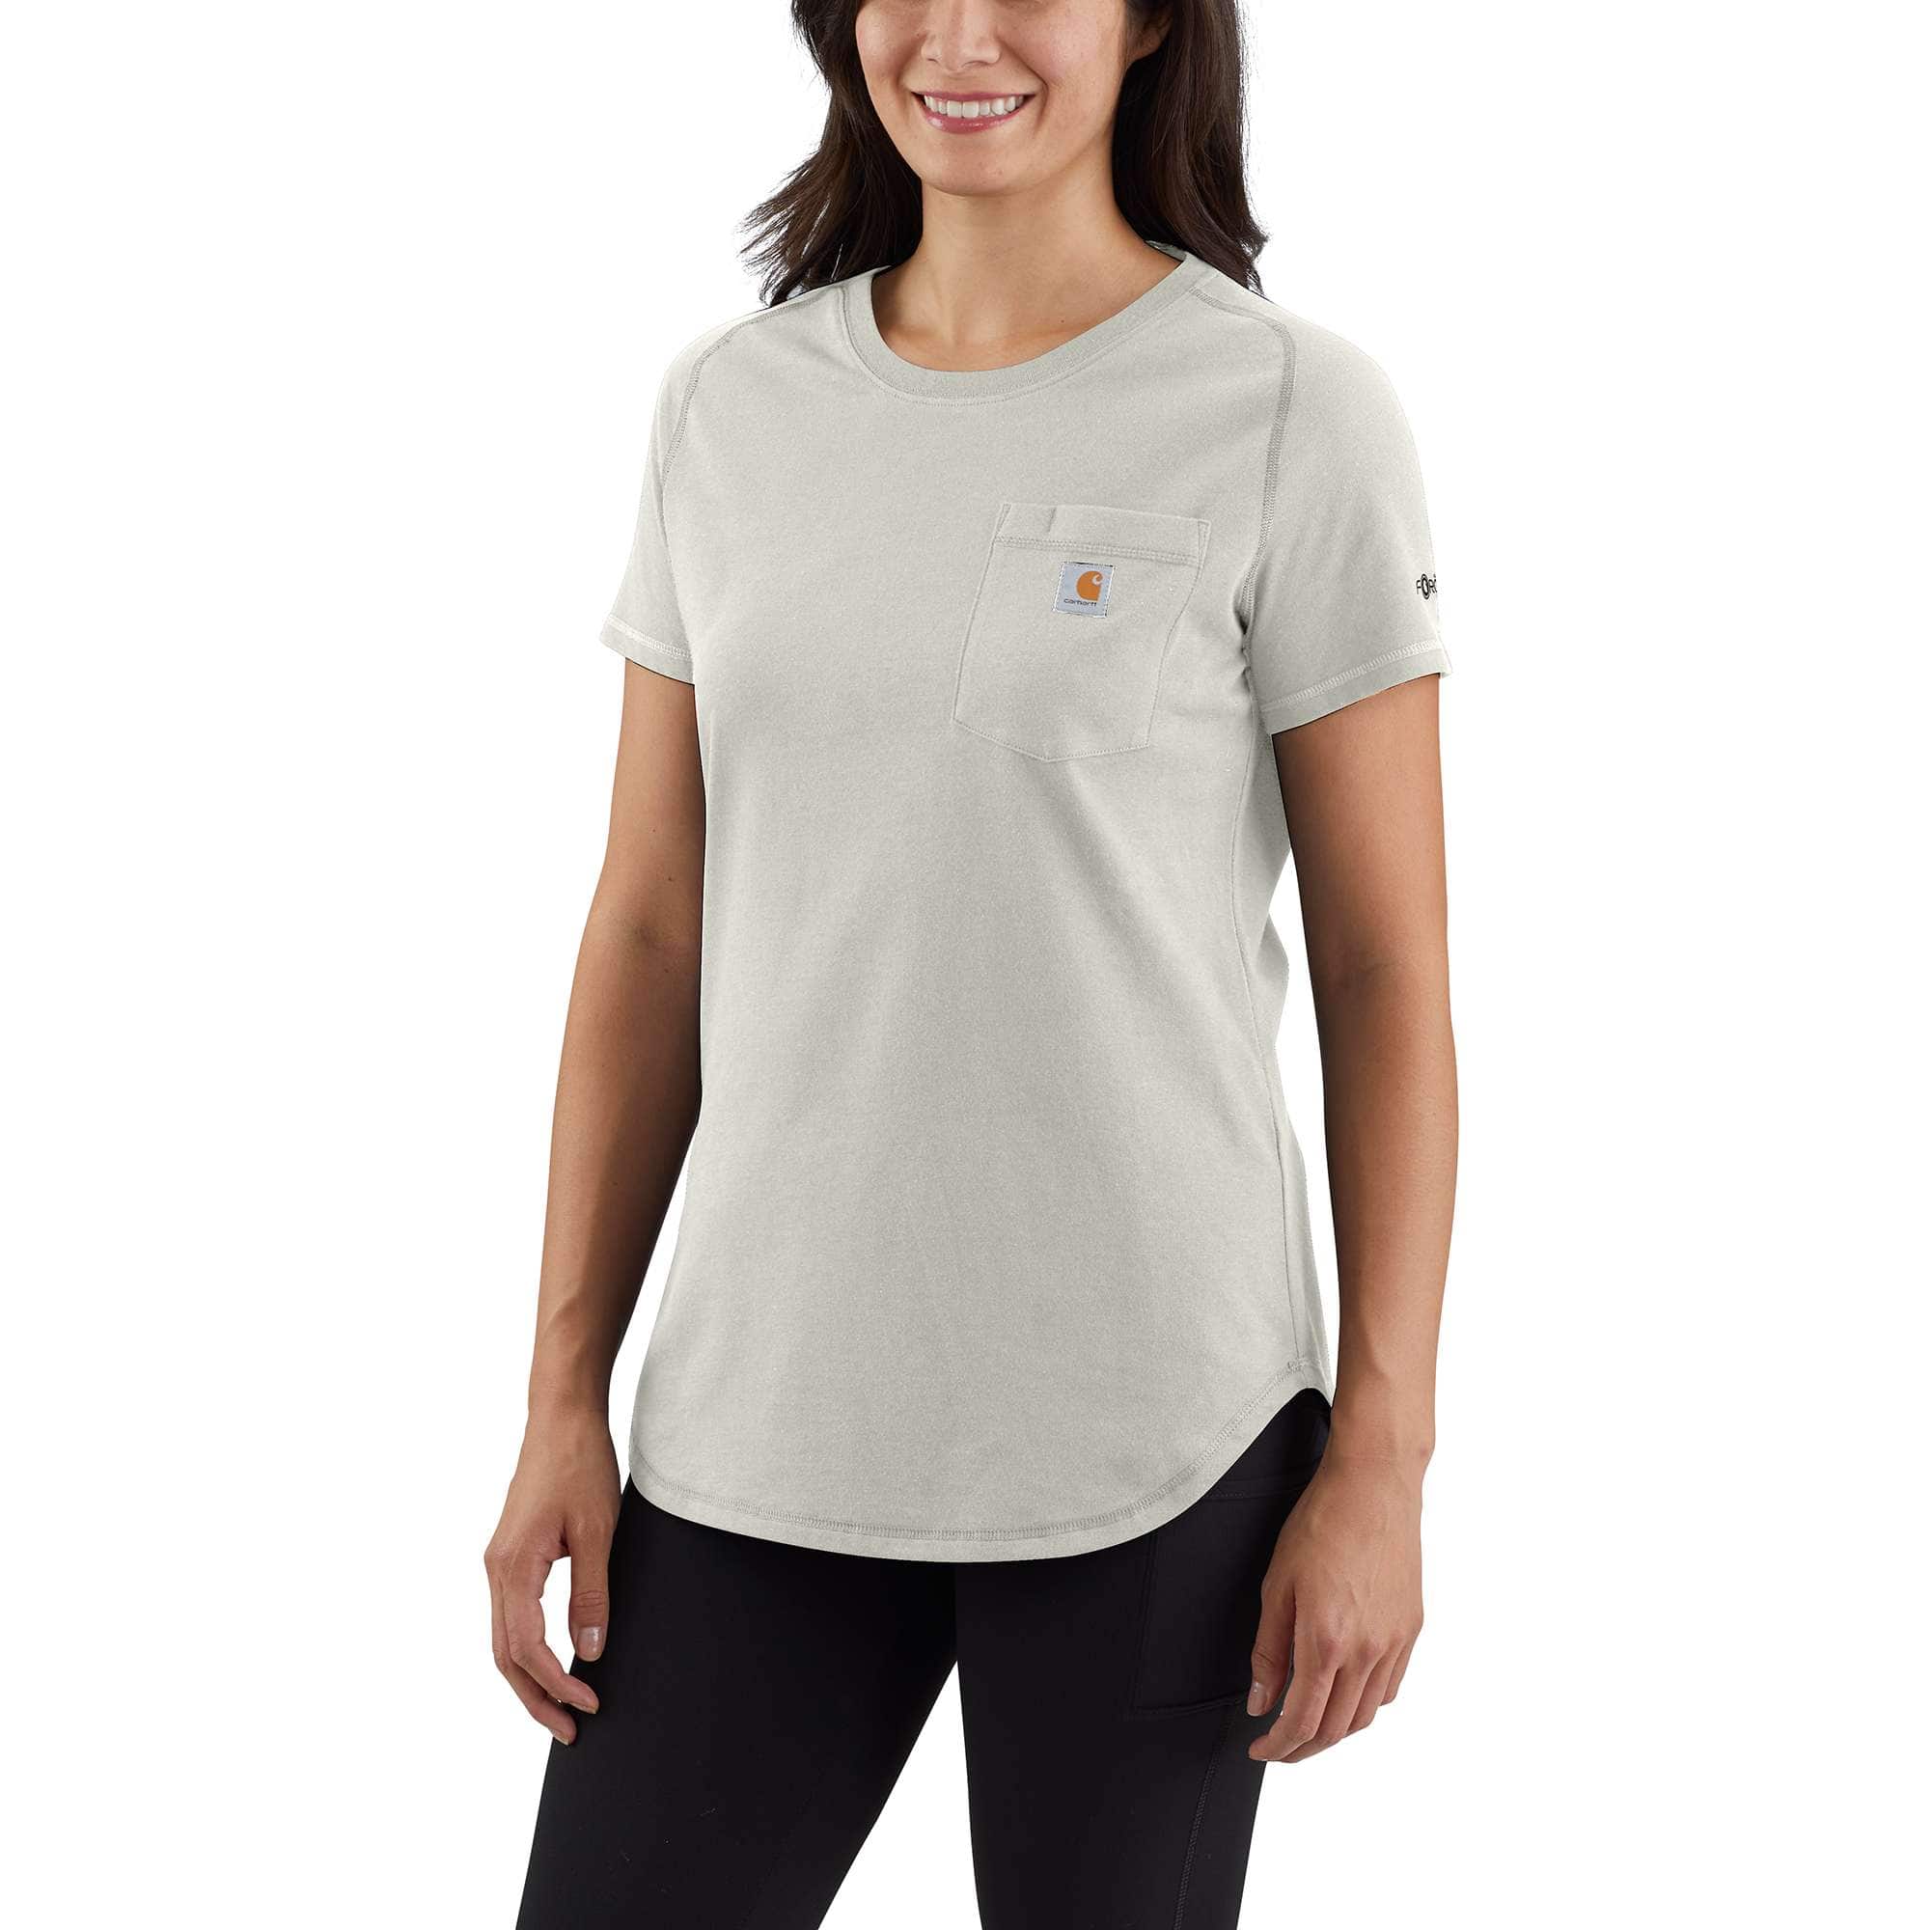 Women's Force Moisture Wicking Clothing